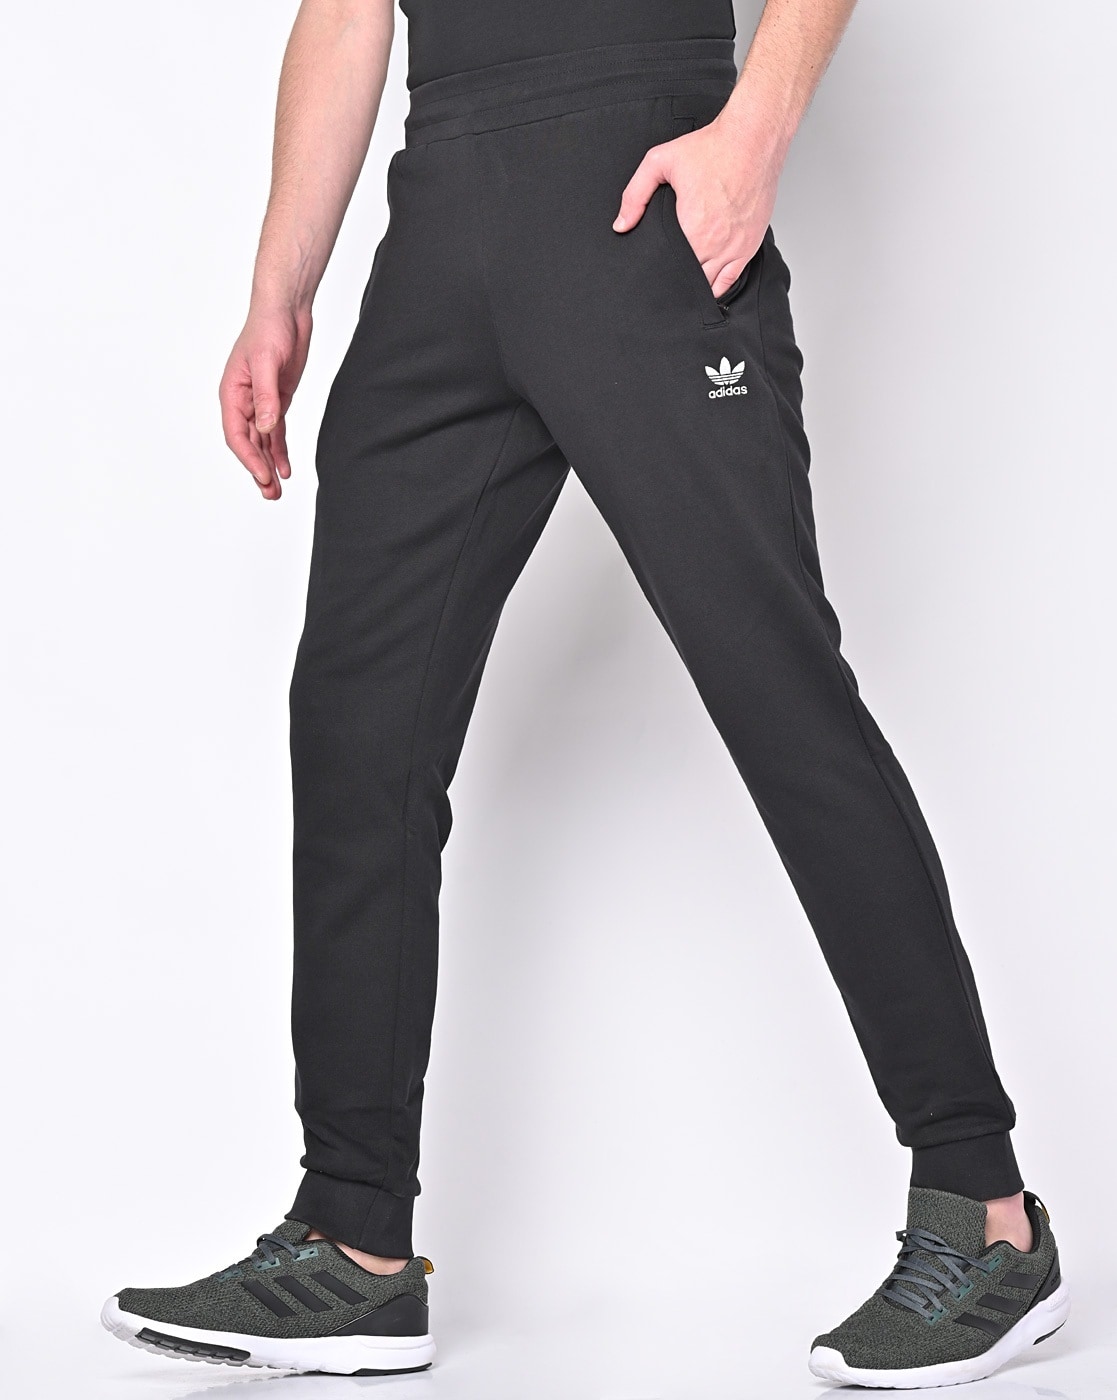 Adidas tracksuit for Menjacket TrackpantLower Black color